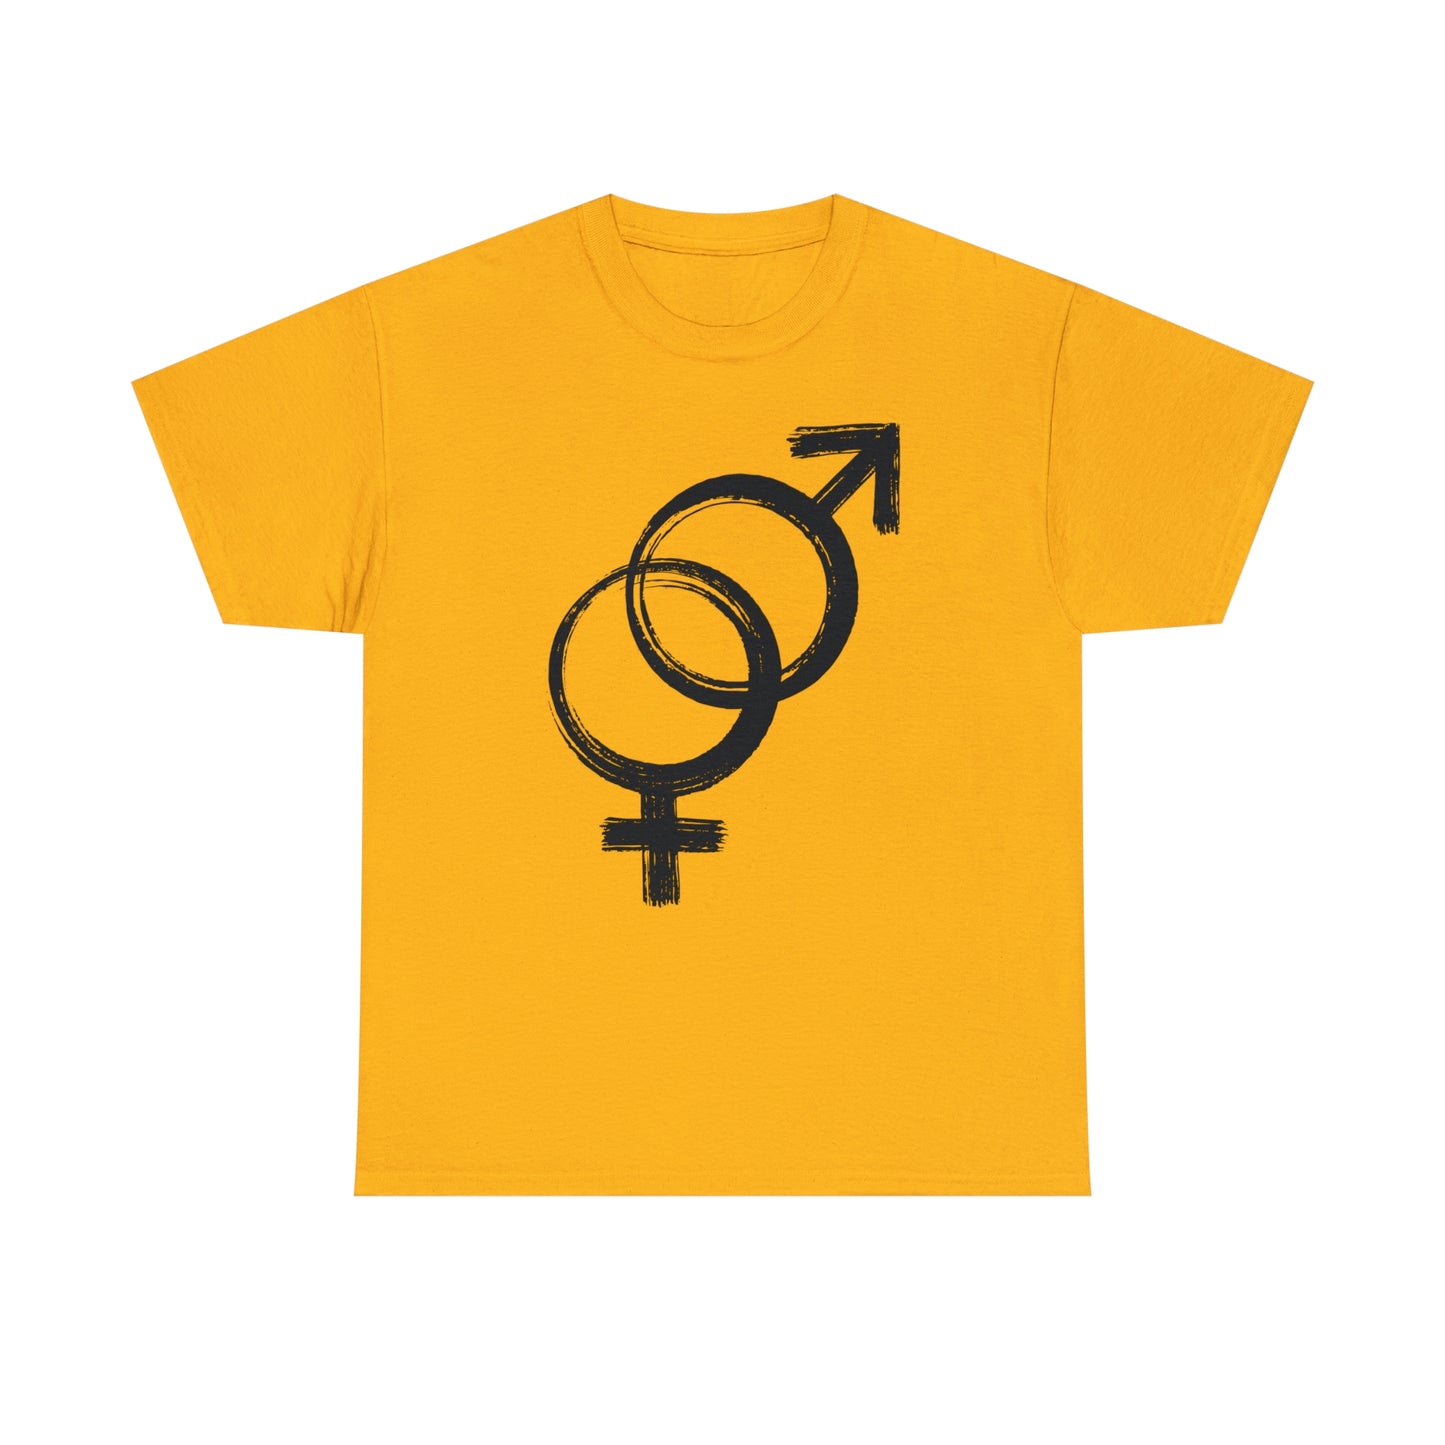 Heterosexual Symbol T-Shirt For Sexual Preference TShirt For Conservative T Shirt For Straight People Shirt For Men T-Shirts For Women